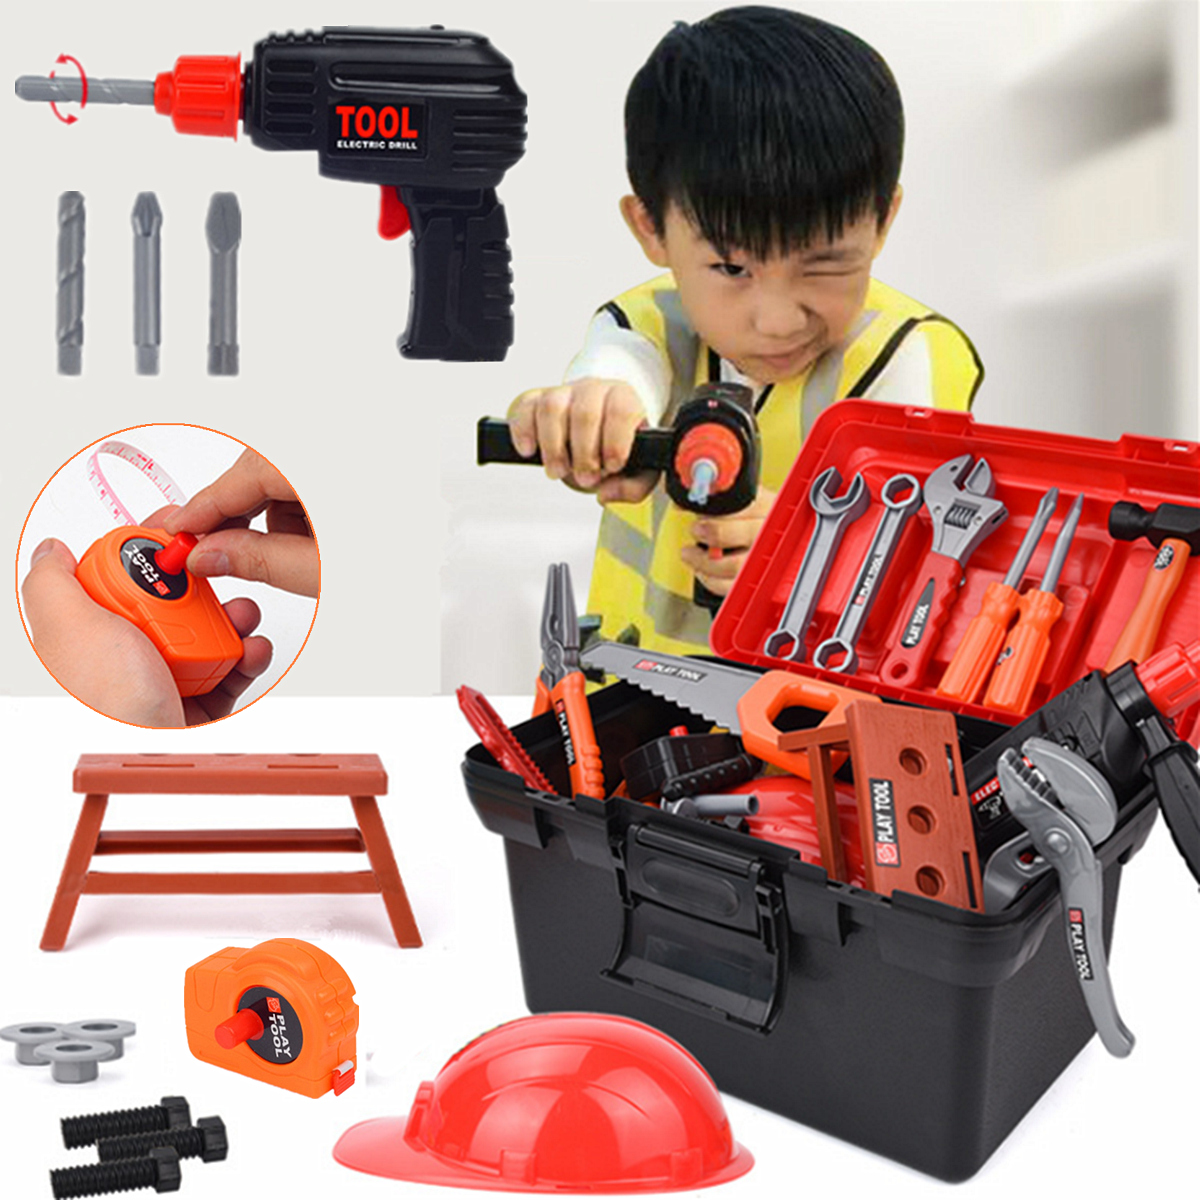 46/47 Pcs Simulation Maintenance Electric Drill DIY Construction Tool Set Pretend Play Educational Toy for Kids Gift - Photo: 10